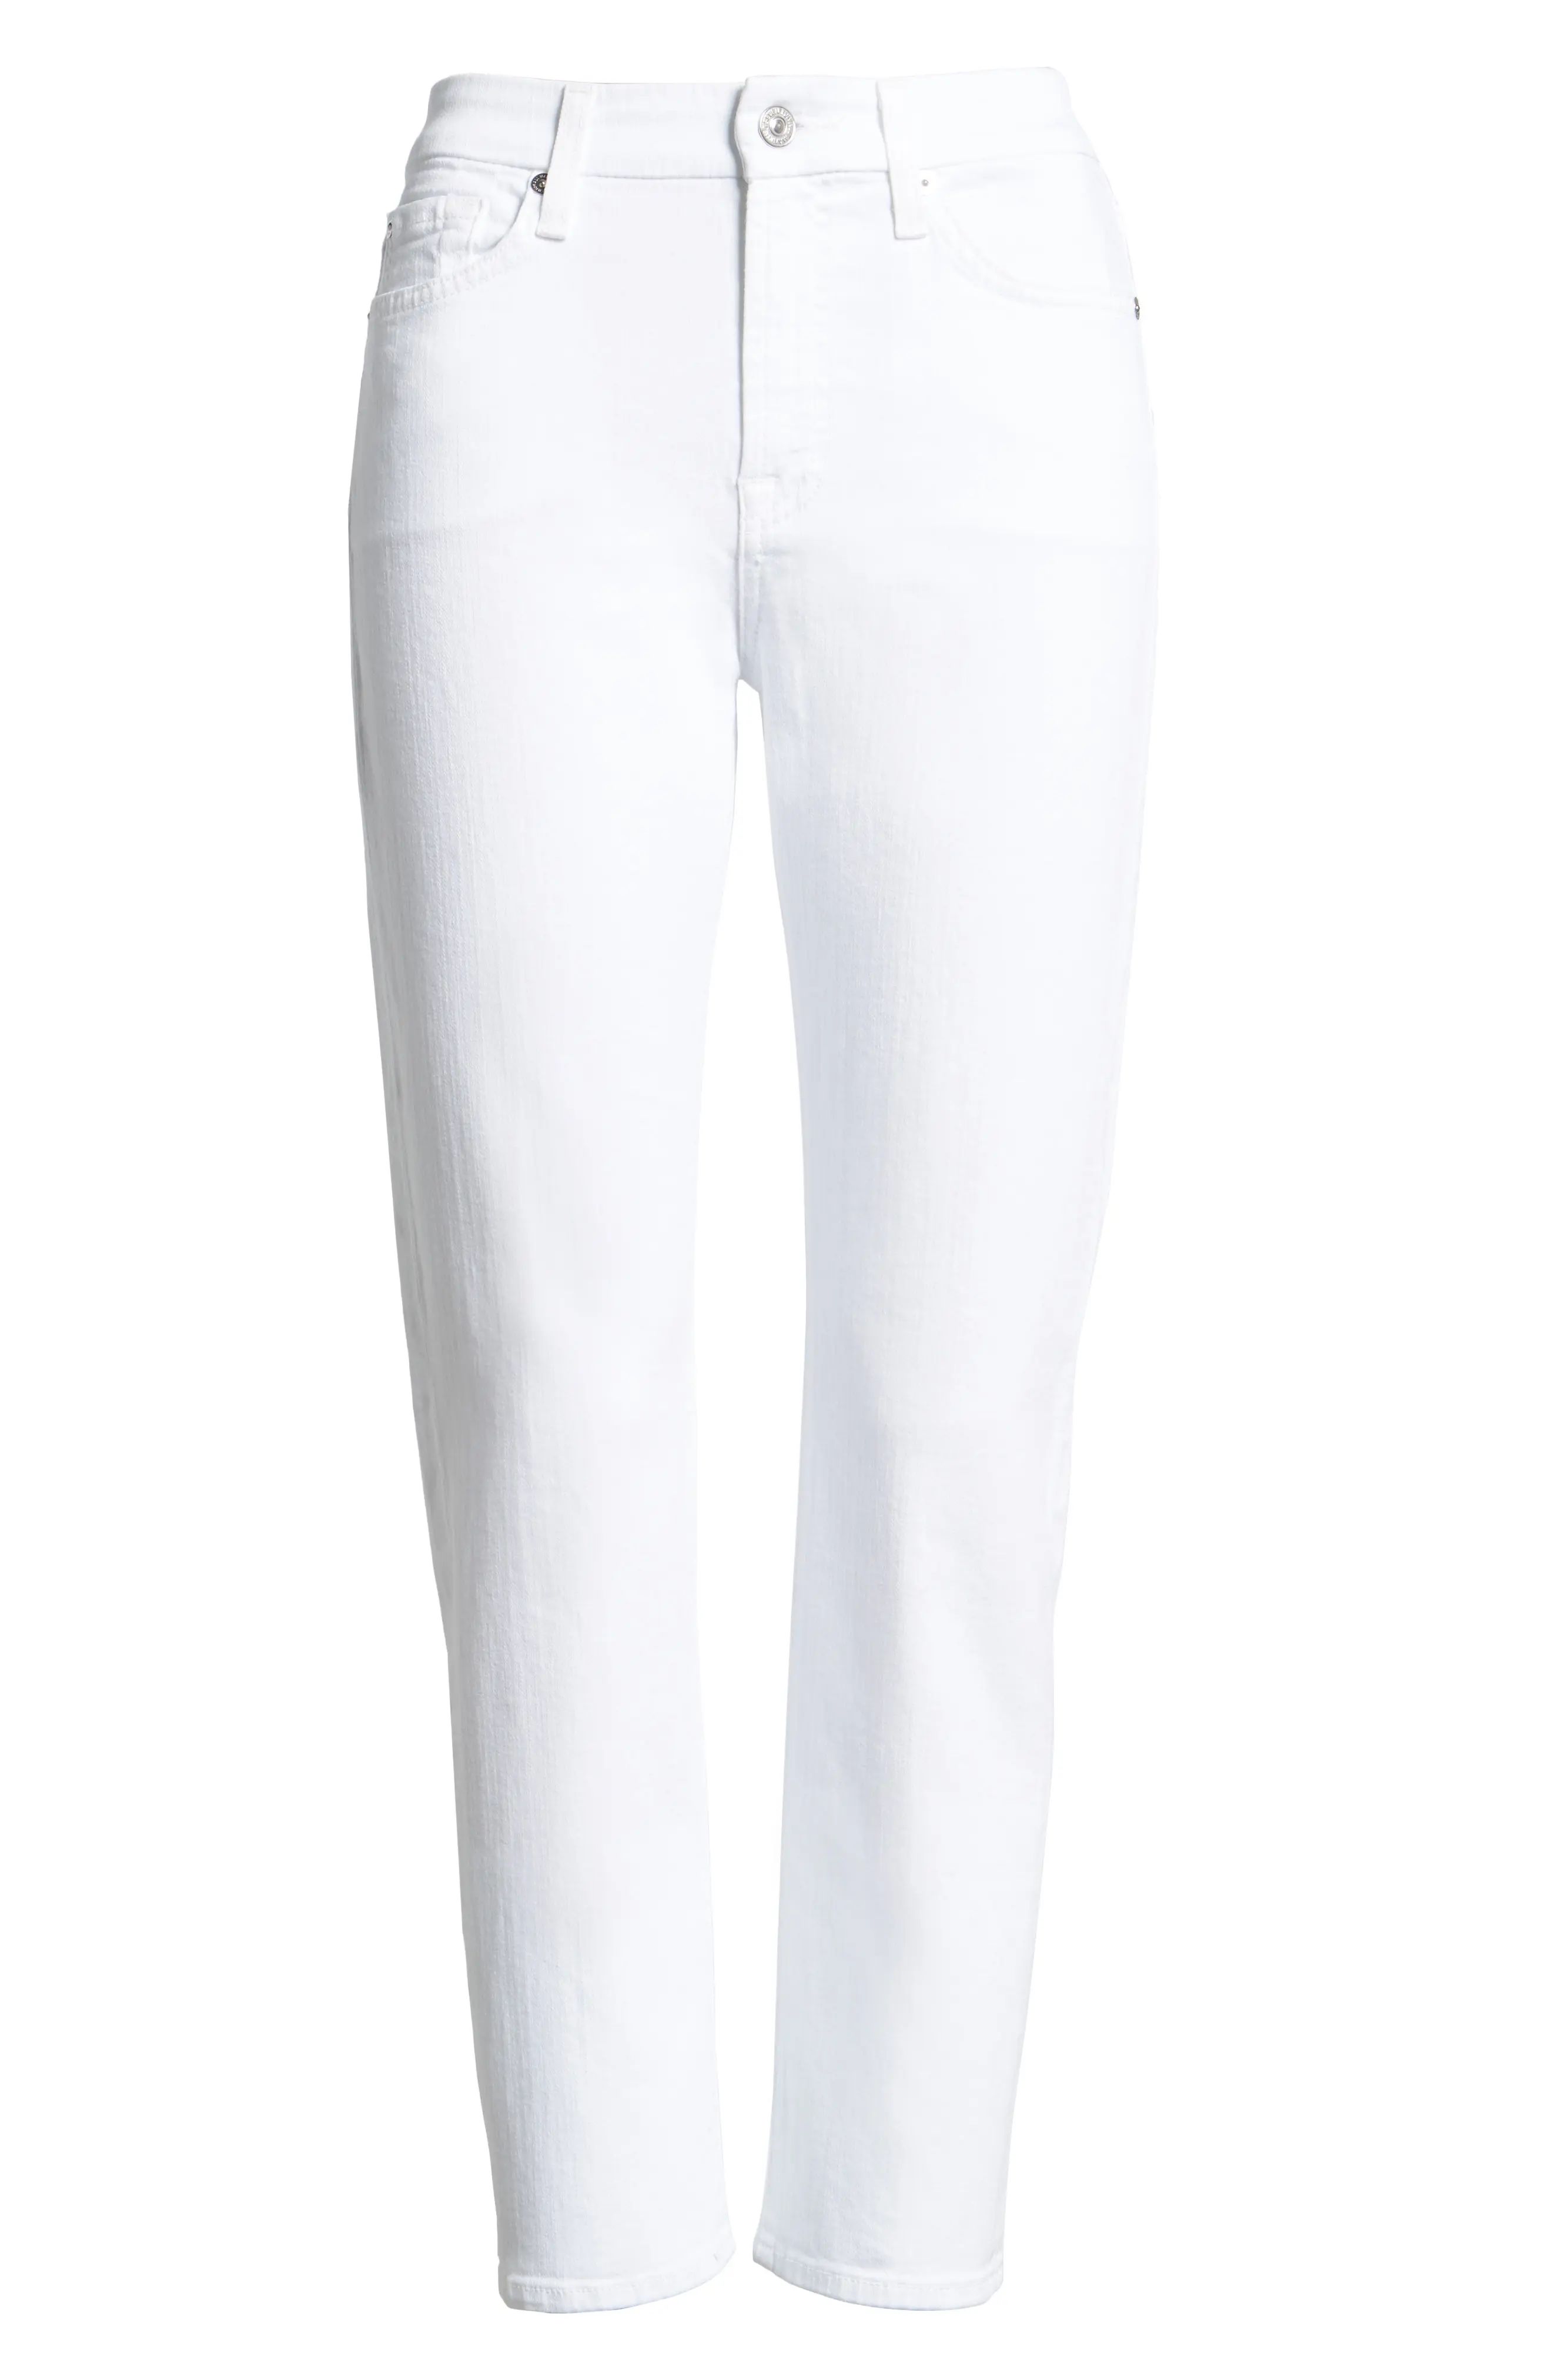 Women's 7 For All Mankind 'Kimmie' Crop Skinny Jeans, Size 33 - White | Nordstrom